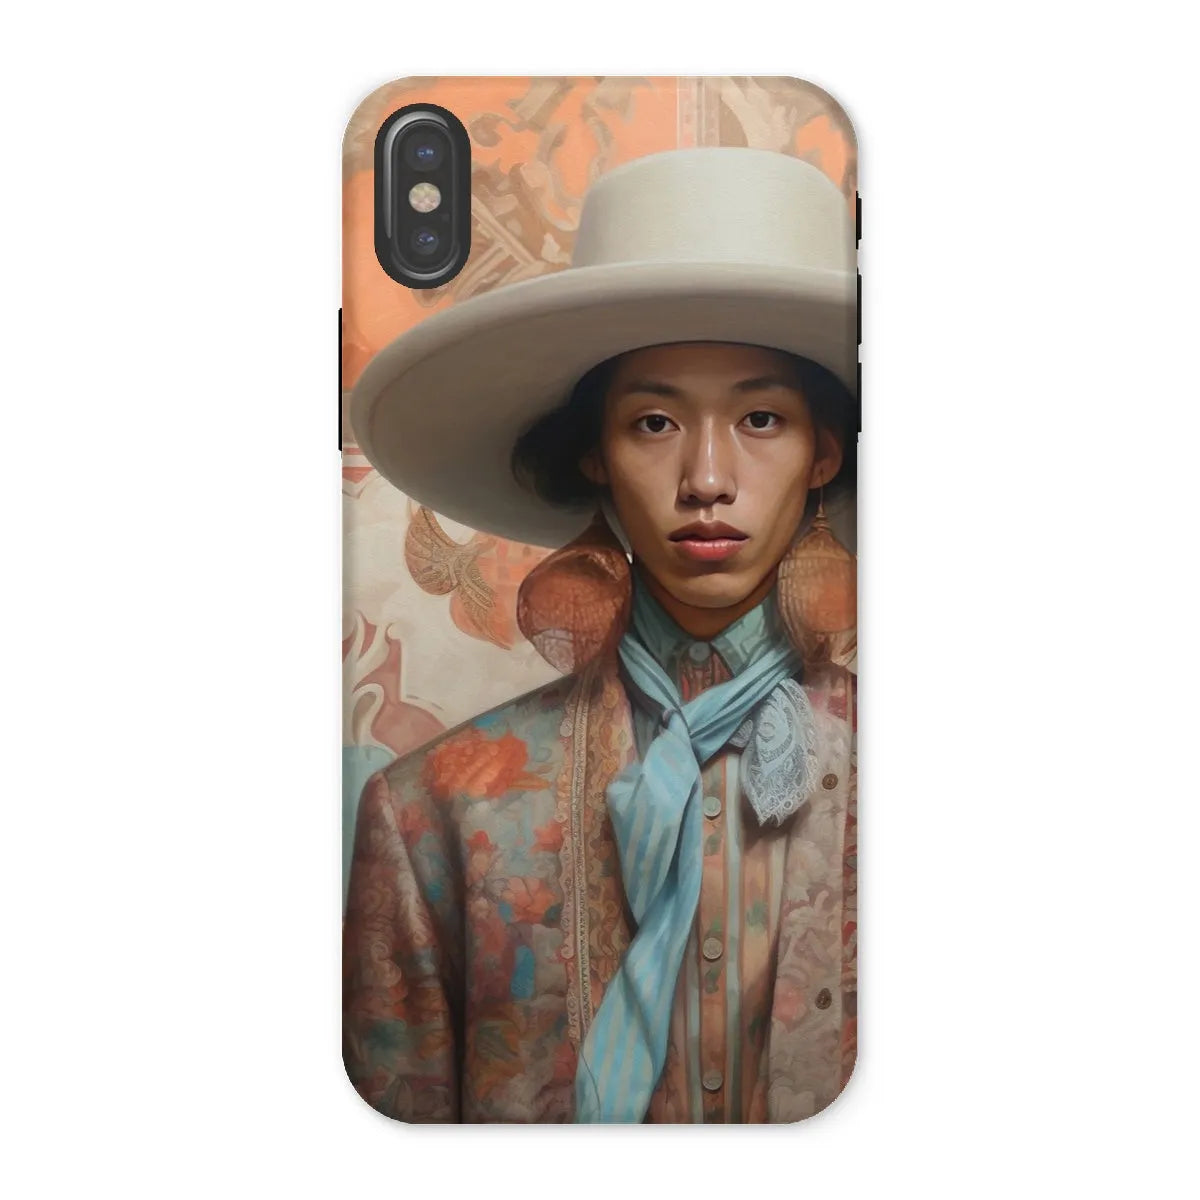 Iyaan The Gay Cowboy - Dandy Gay Aesthetic Art Phone Case - Iphone x / Matte - Mobile Phone Cases - Aesthetic Art